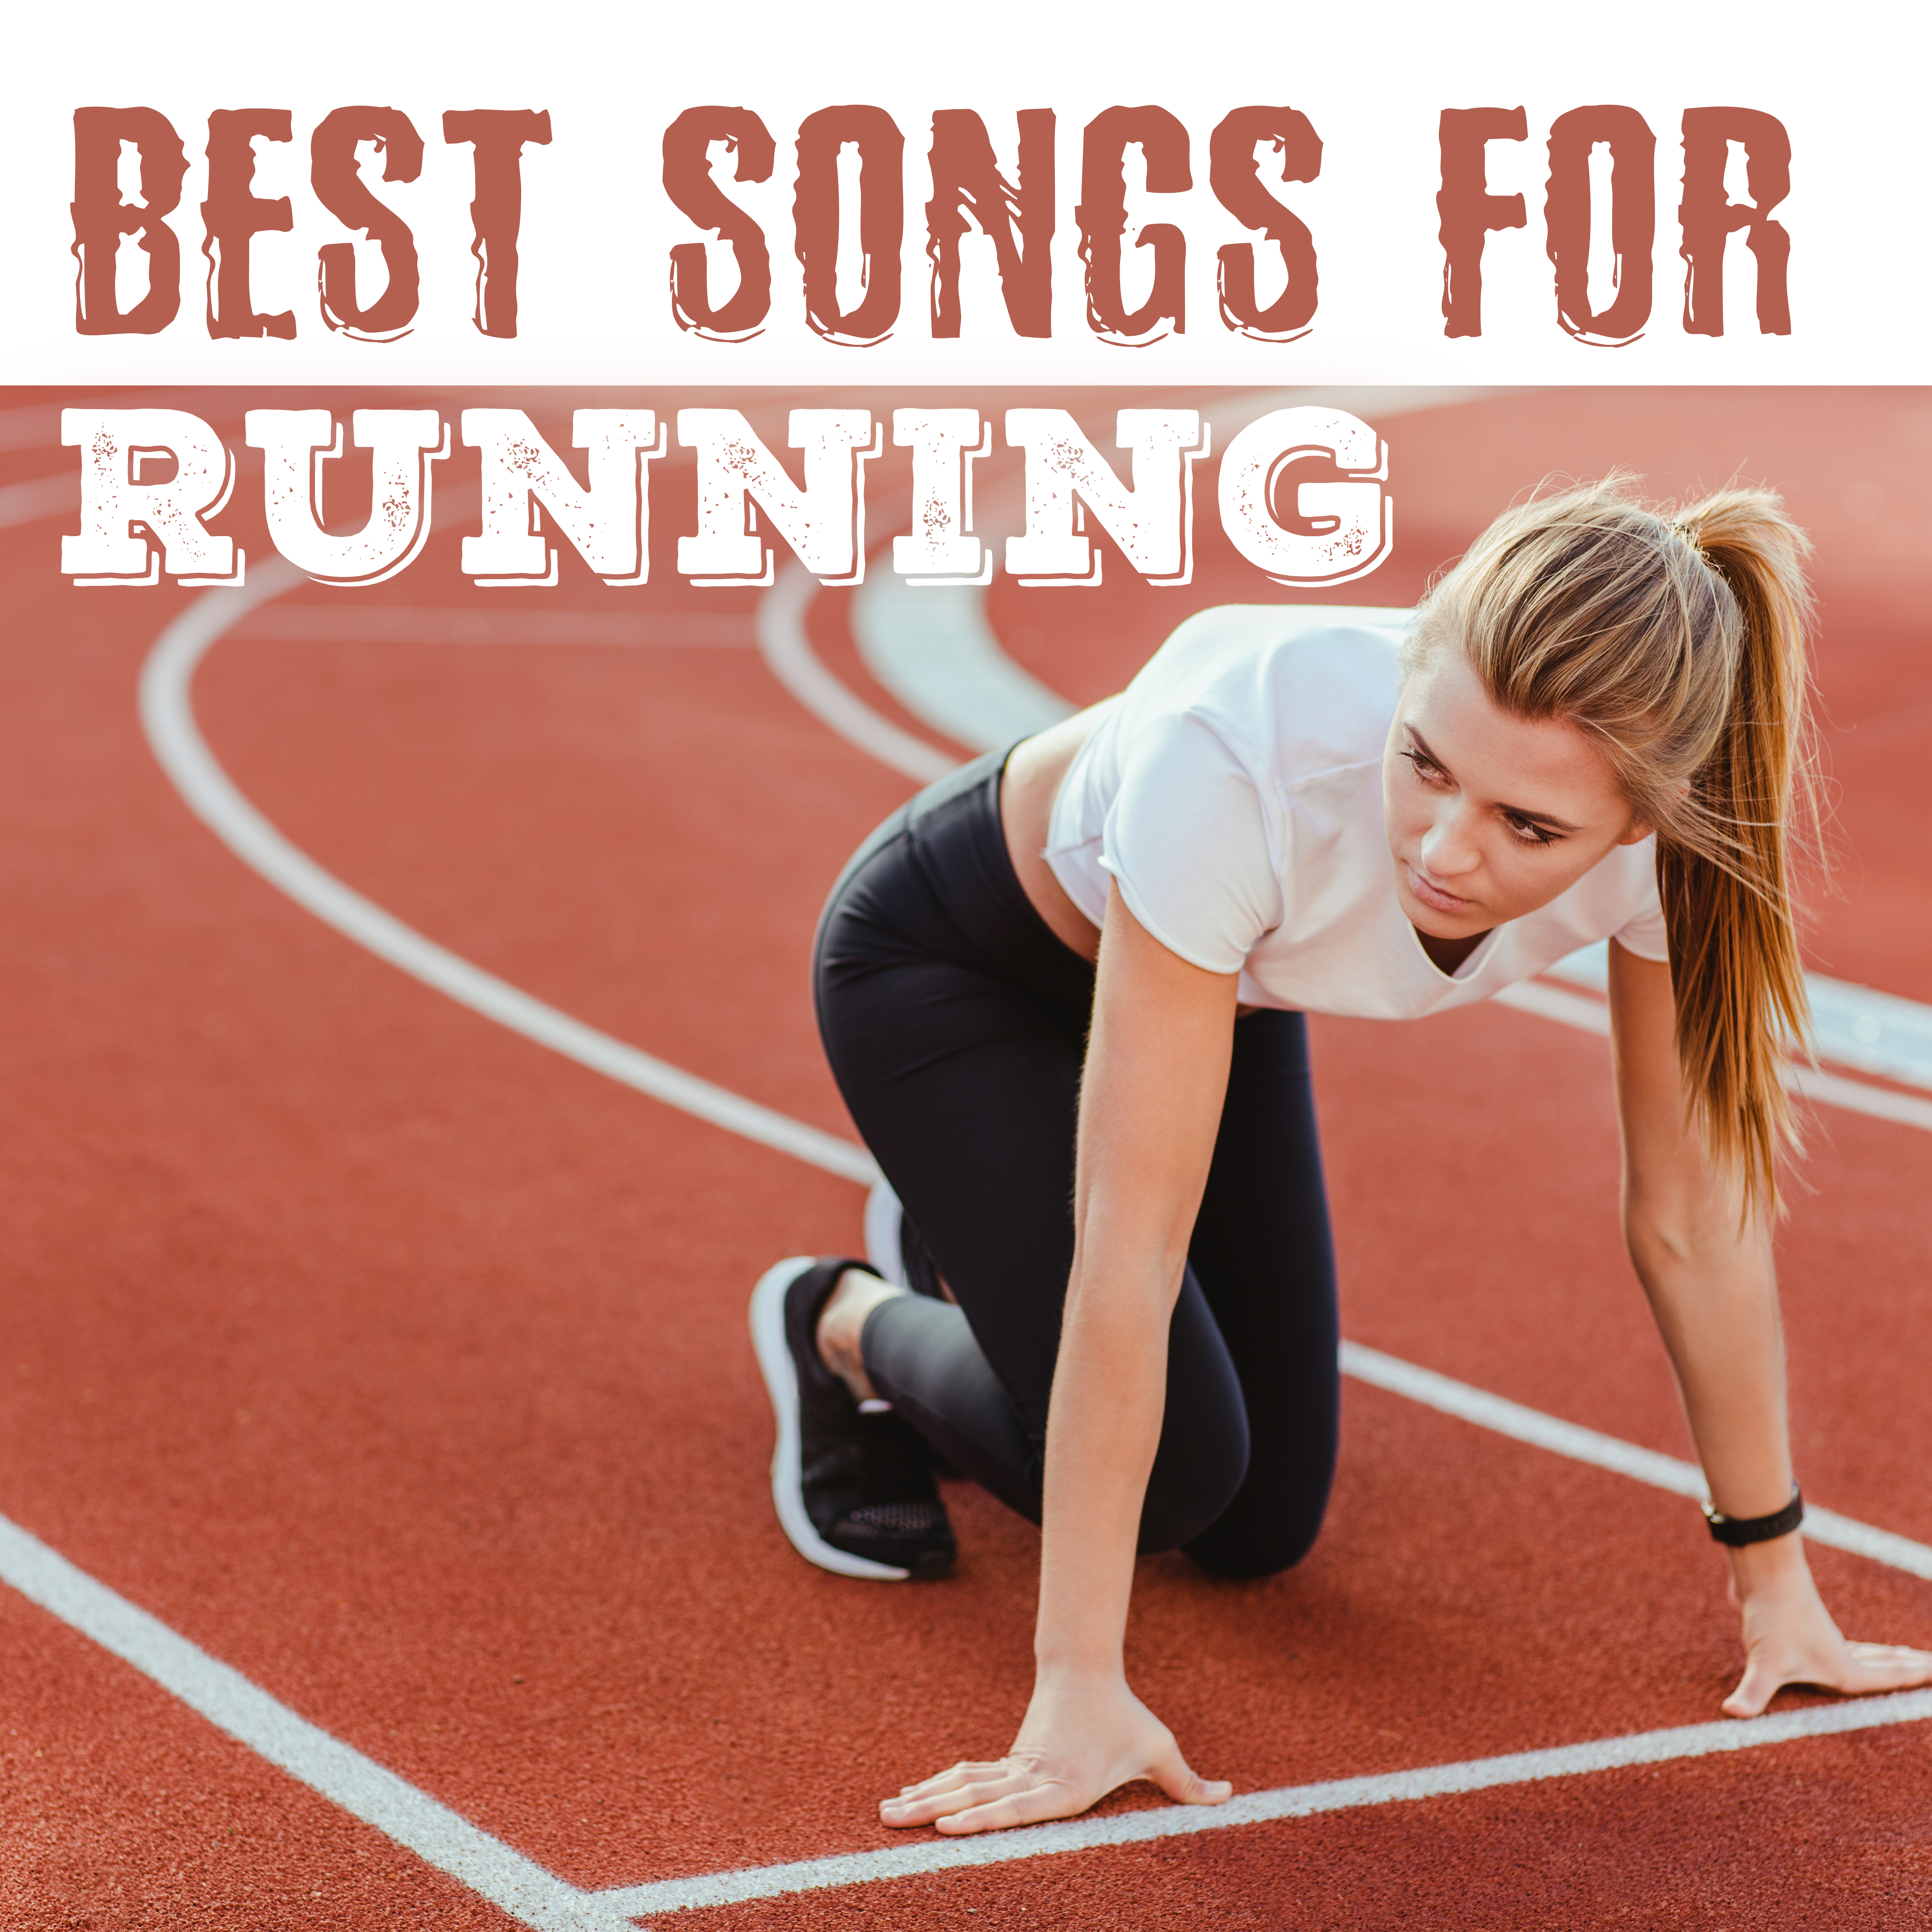 Best Songs for Running – Good Workout, Running Hits, Inner Healing, Chill Out 2017, Stress Relief